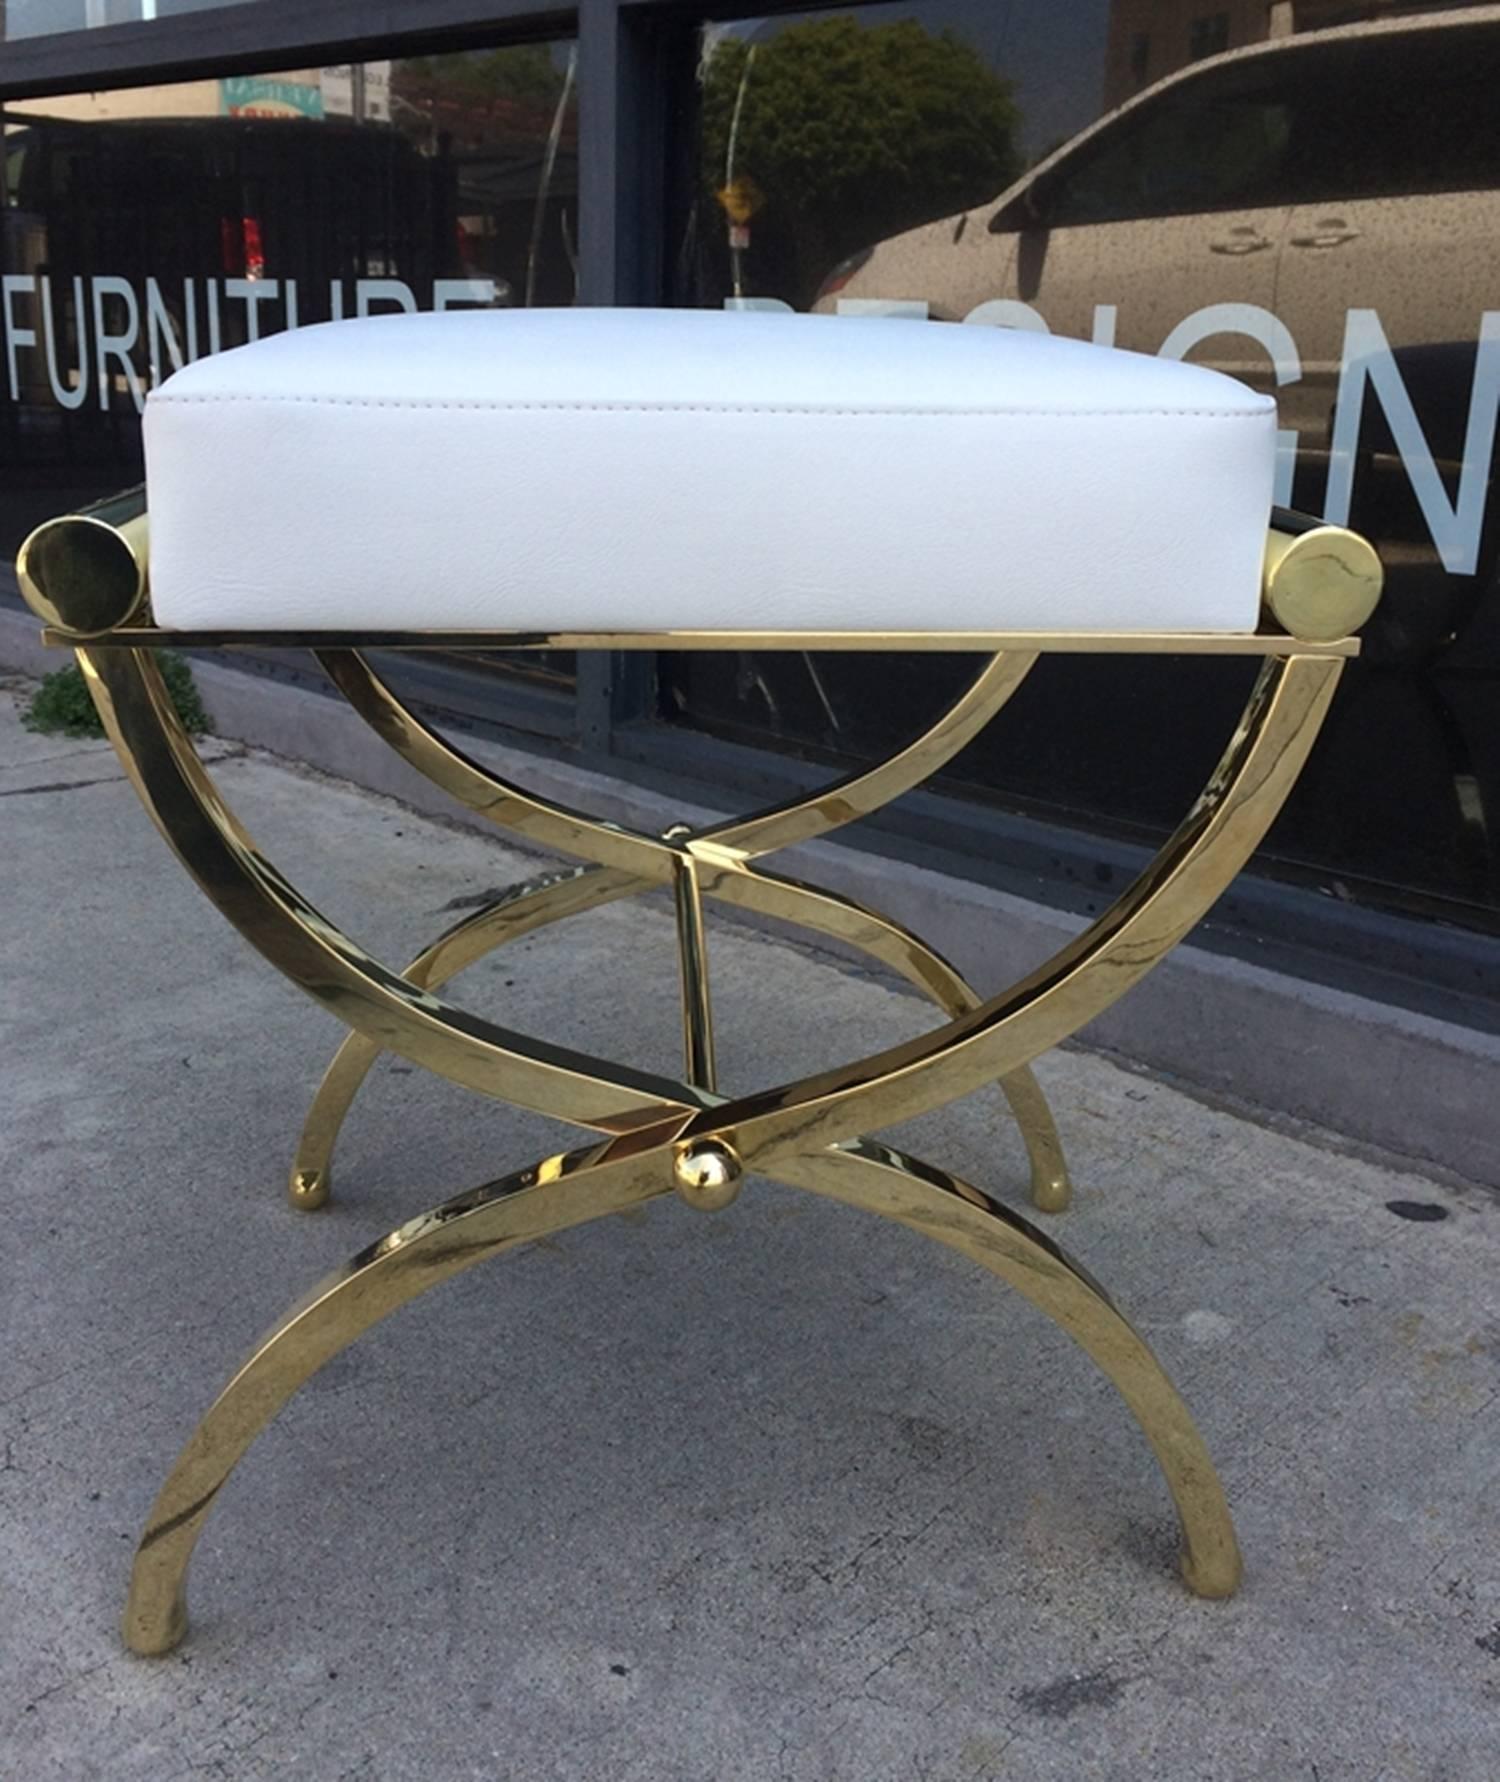 Exceptional pair of Empire style benches designed and manufactured by Charles Hollis Jones.
The benches were designed in the 1960s and they are just as influential today.

The playful frames of these benches is made of solid brass with Lucite